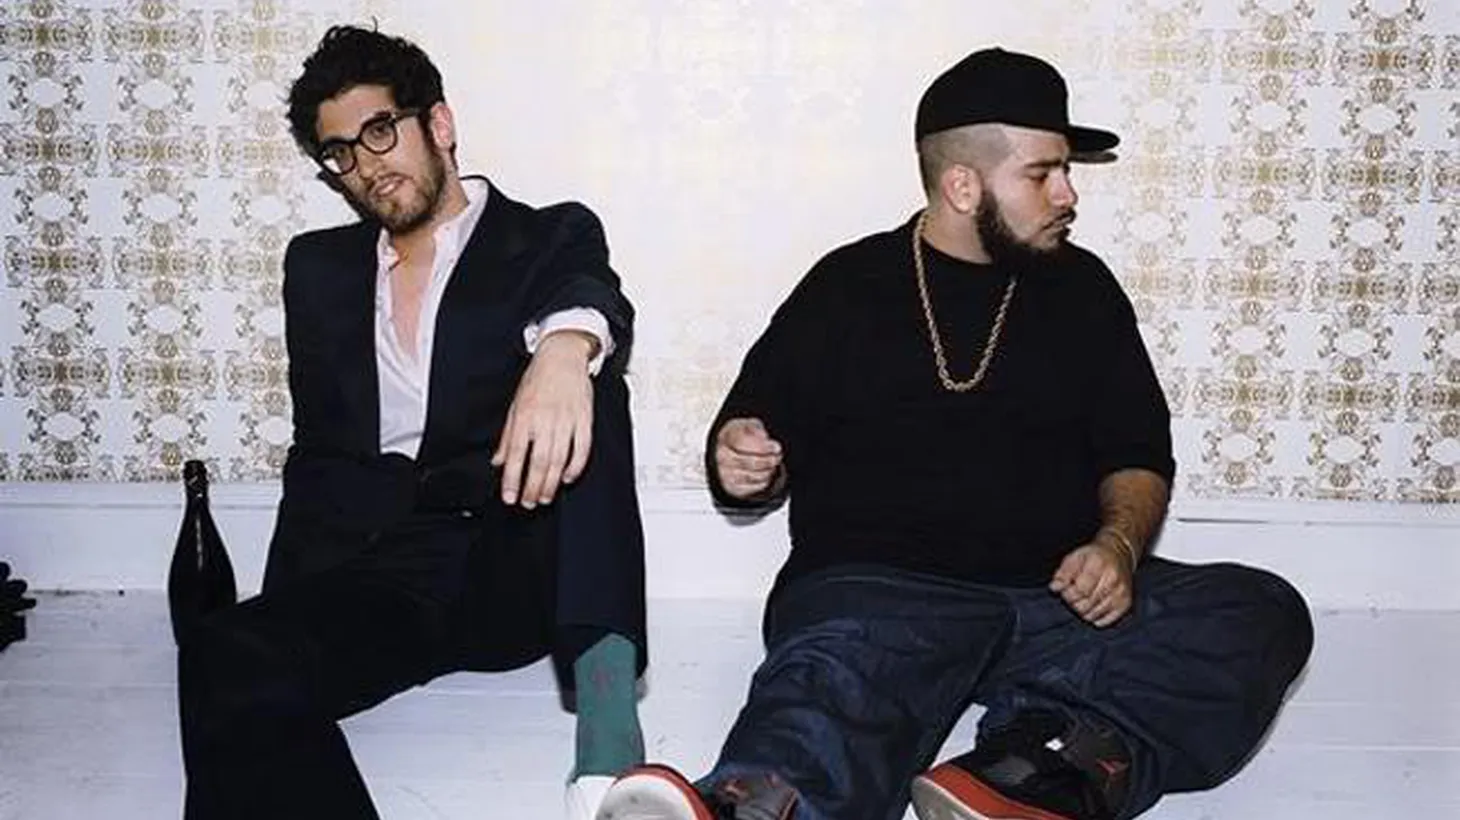 On the heels of their Hollywood Bowl debut, dance duo Chromeo bring their slick riffs and hook heavy funk to Morning Becomes Eclectic listeners at 11:15am.